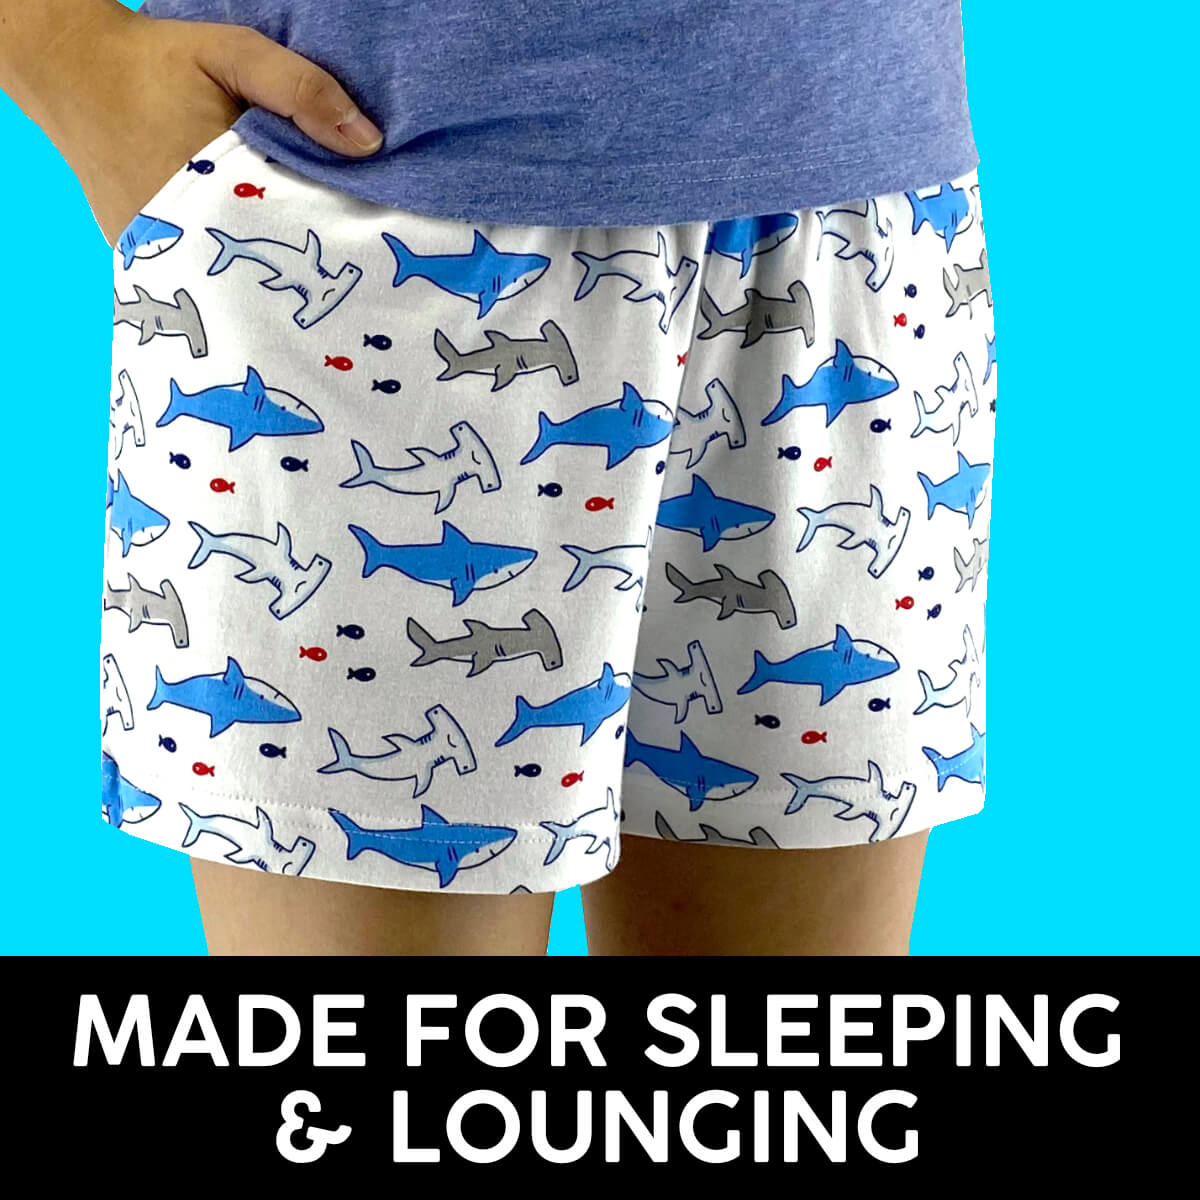 100% Cotton Pajama Shorts. With a 3 inch inseam, these shorts are made to fit you perfectly; not too short and not too tight.